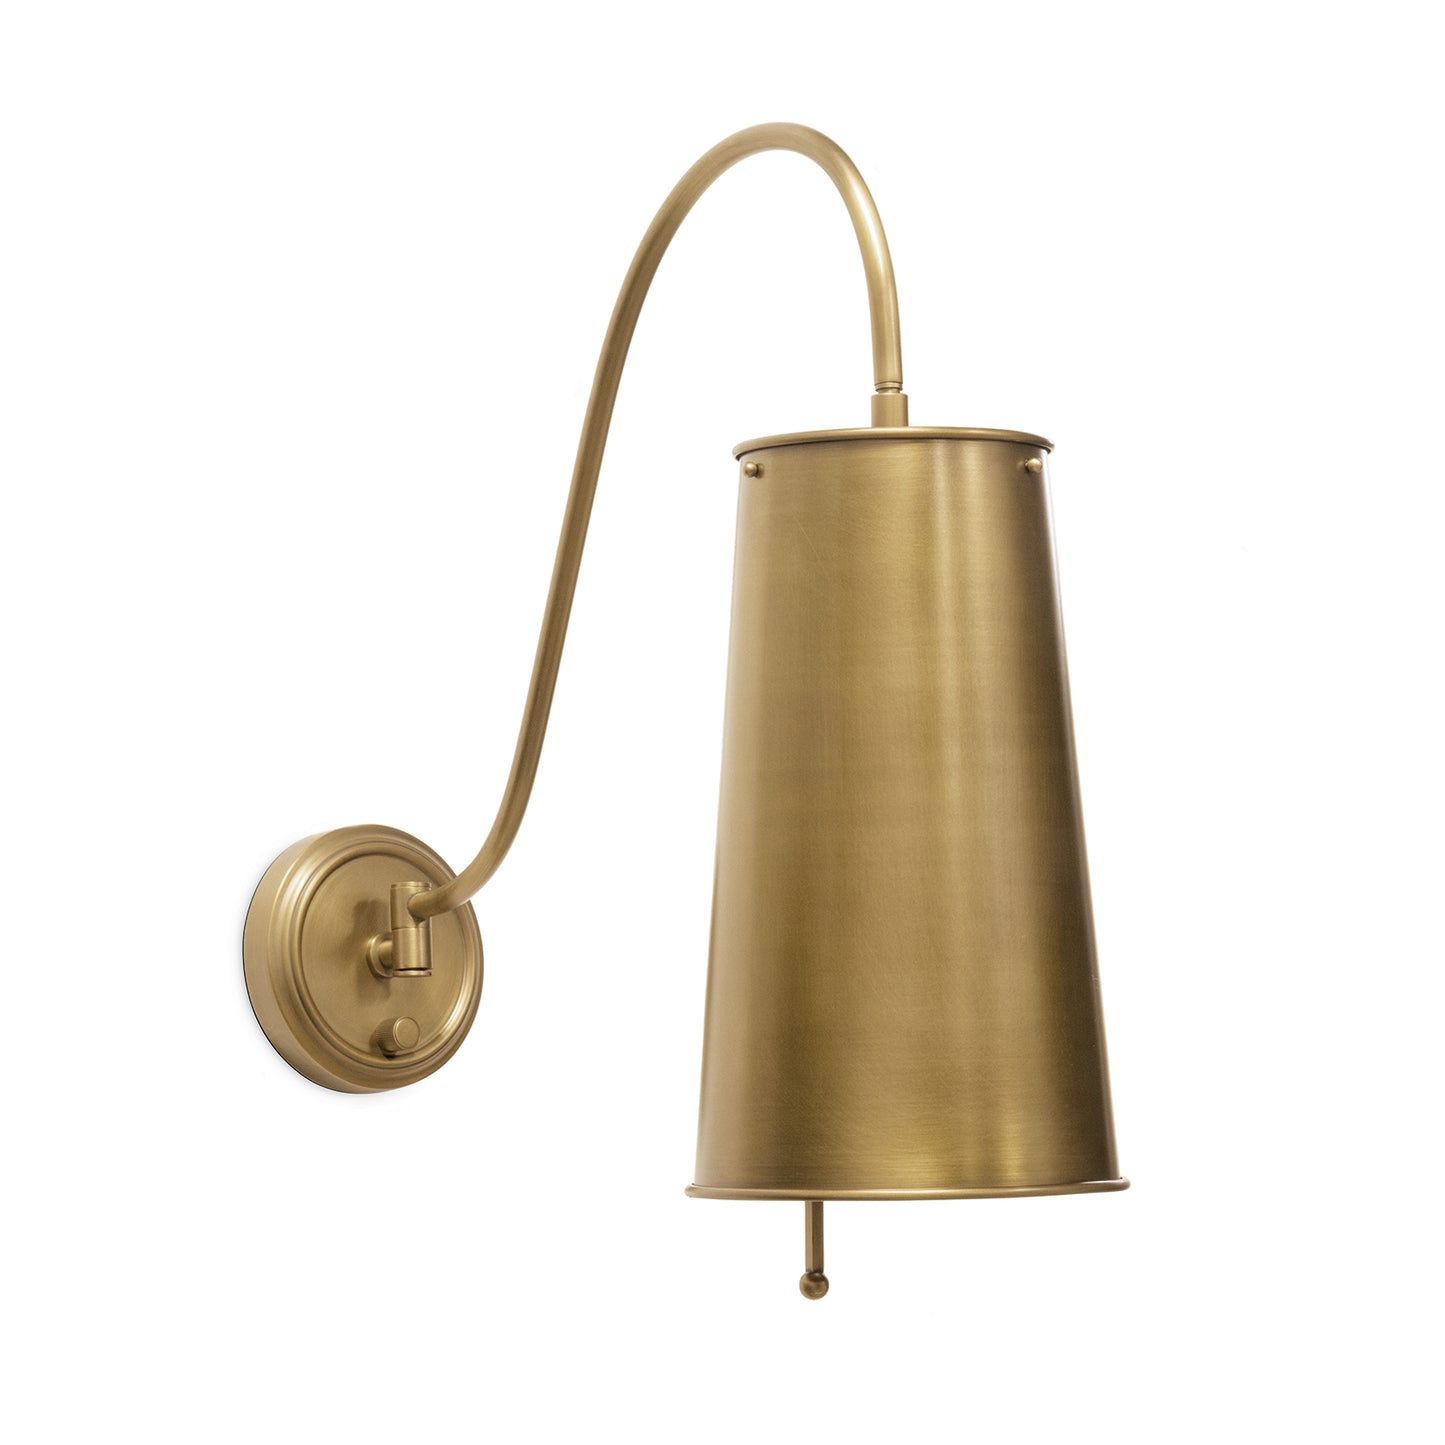 Hattie Sconce in Natural Brass by Southern Living